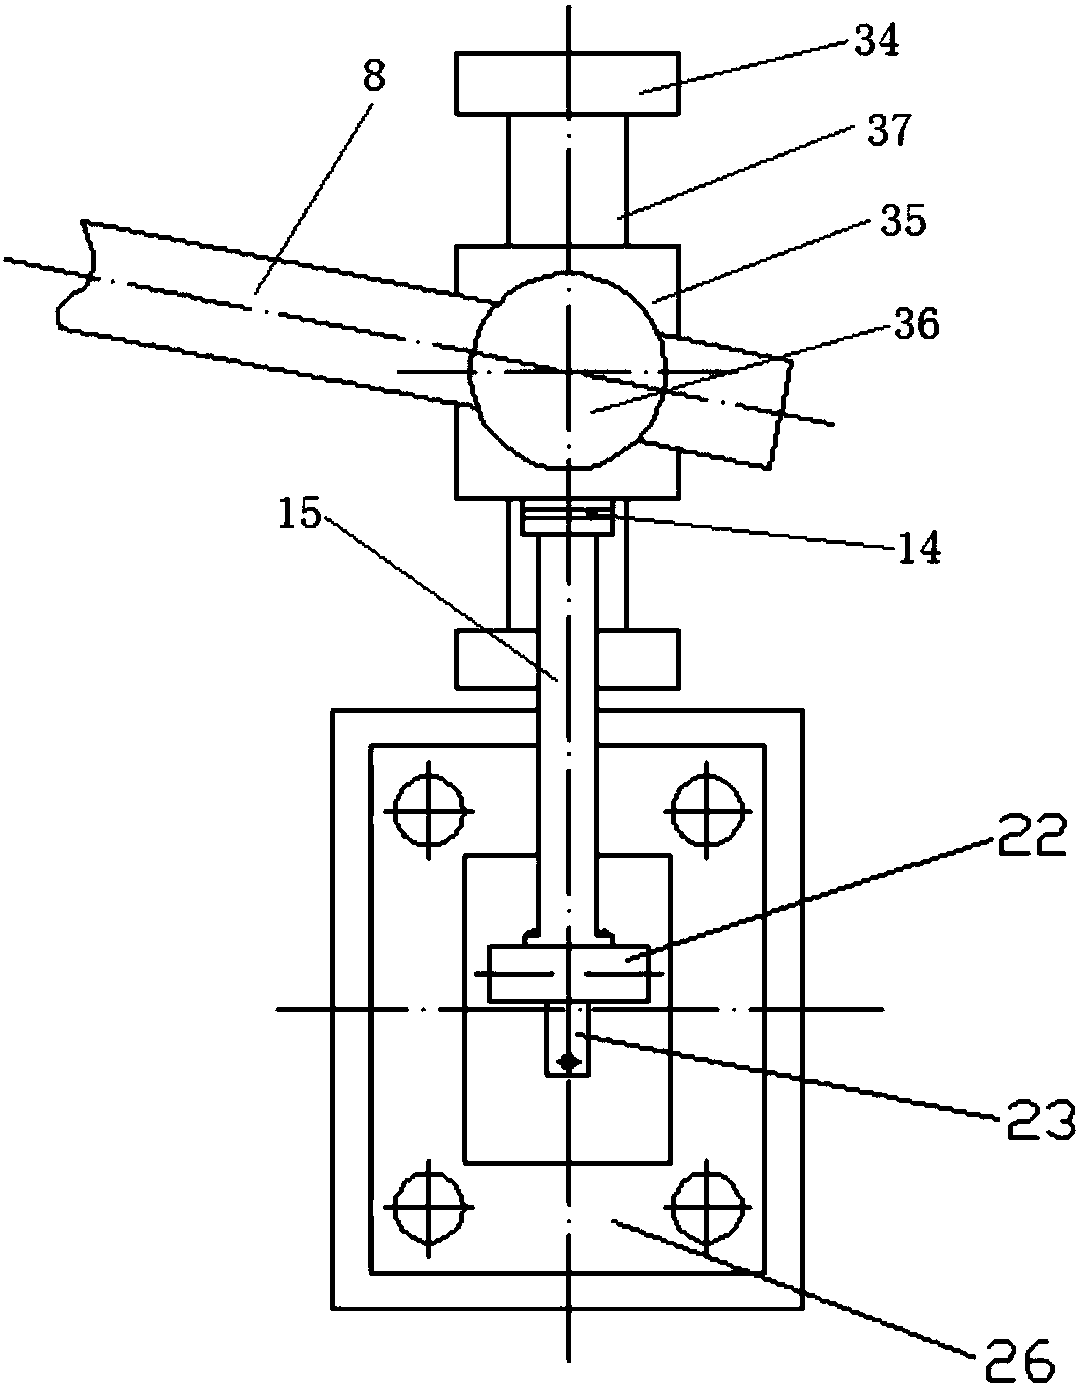 Amplitude controllable material fretting wear test device